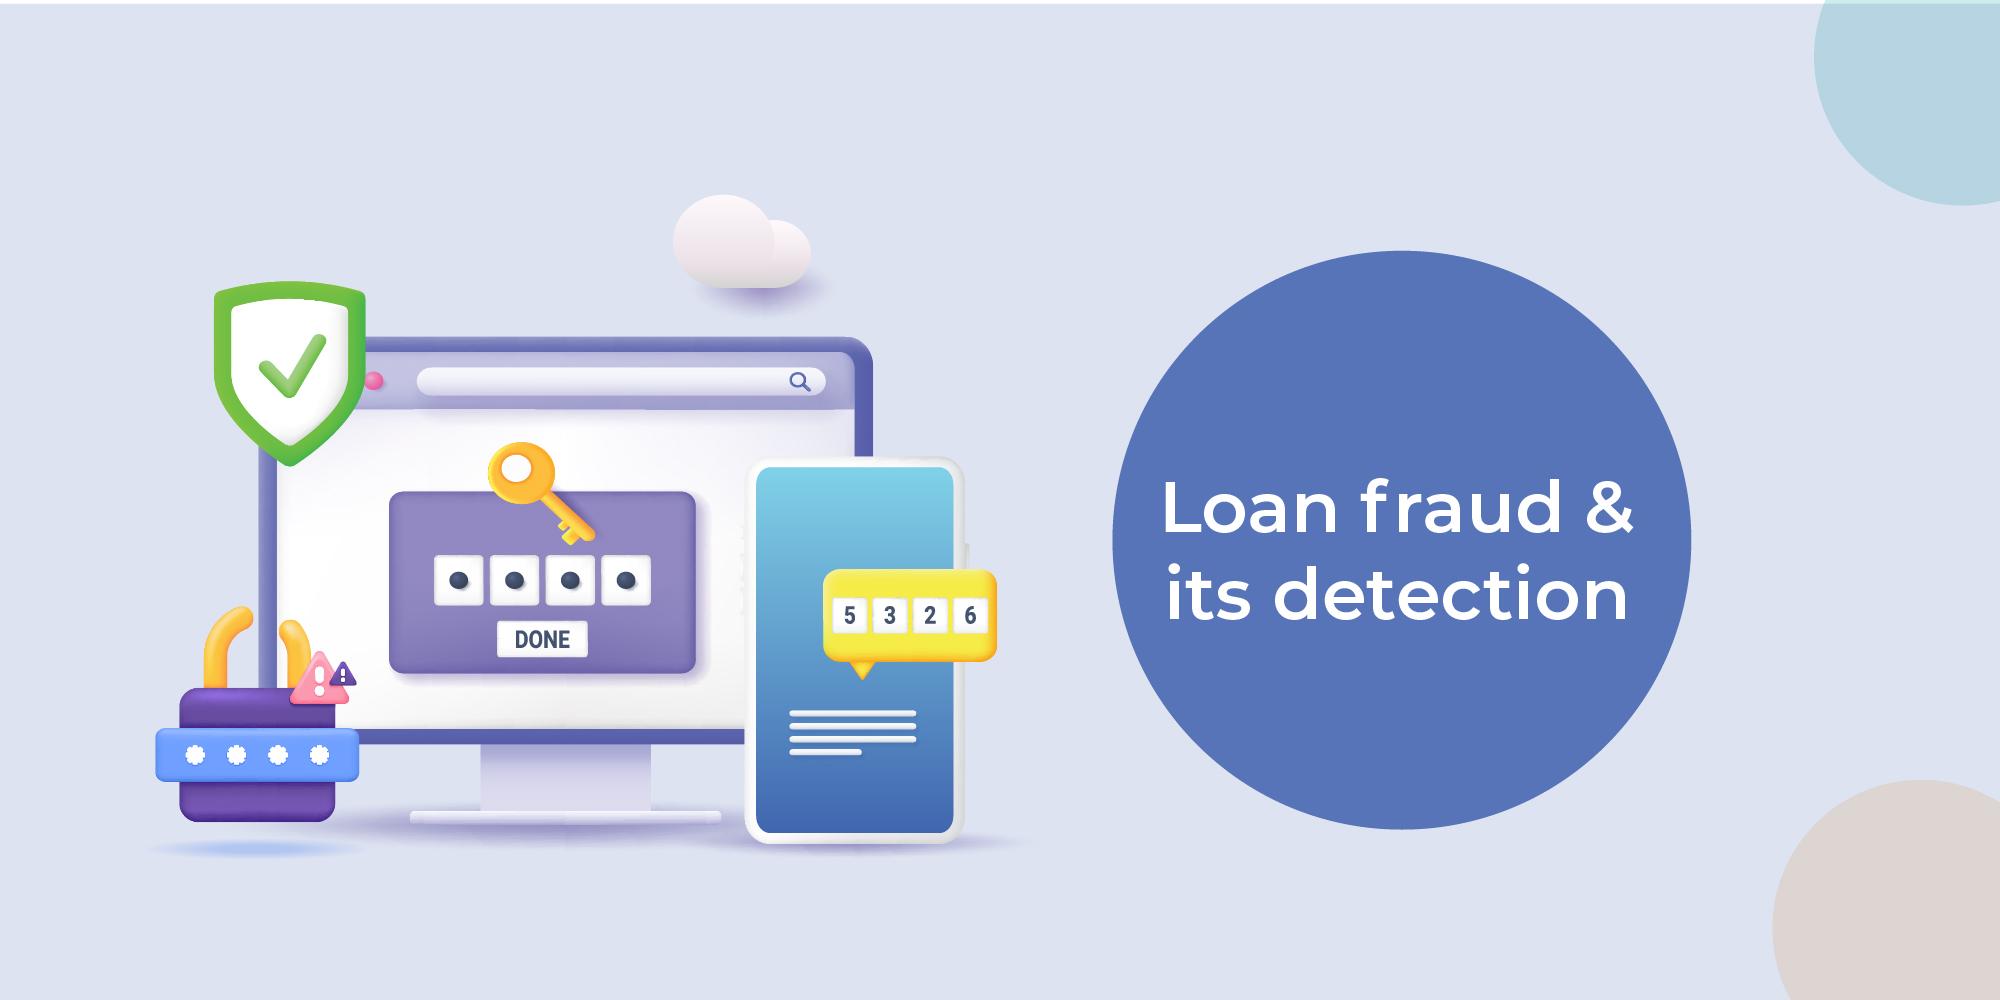 Loan Fraud: Easy tips on how to detect and avoid it